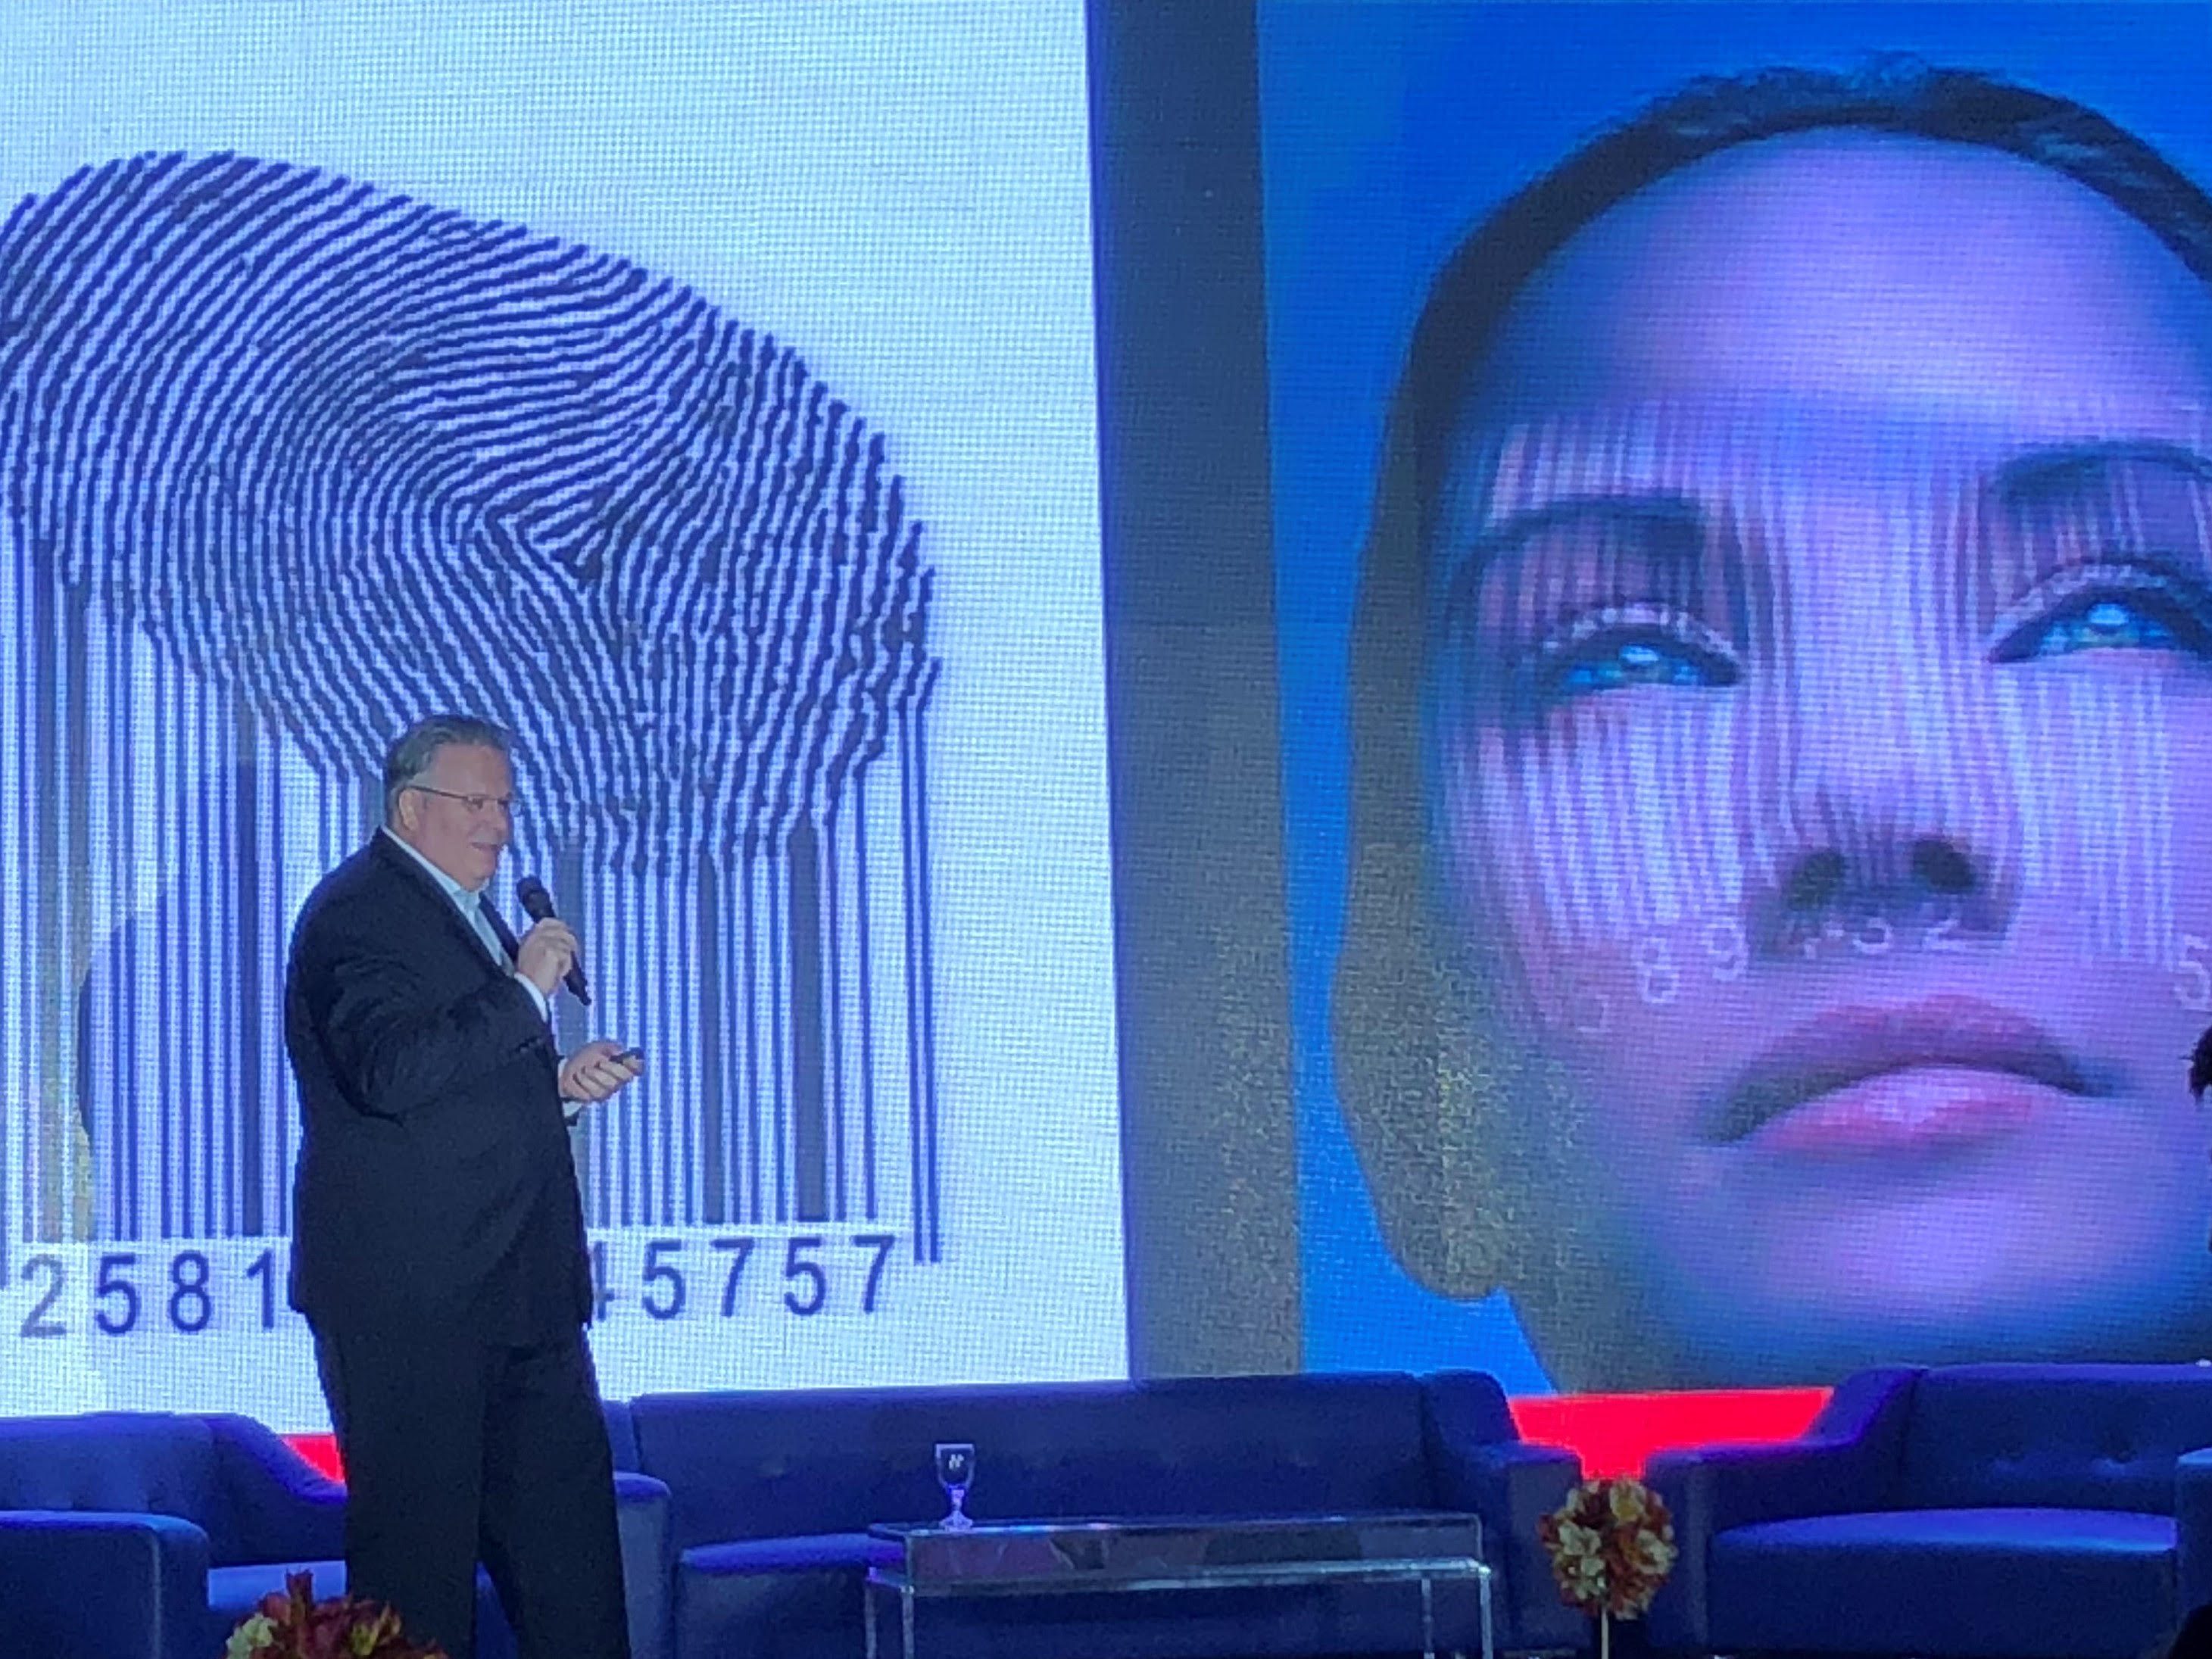 JEBB LEWIS. The vice president of a security solutions firm finds it hard to trust face authentication technology in its current form. Photo by Edd Usman/Rappler 